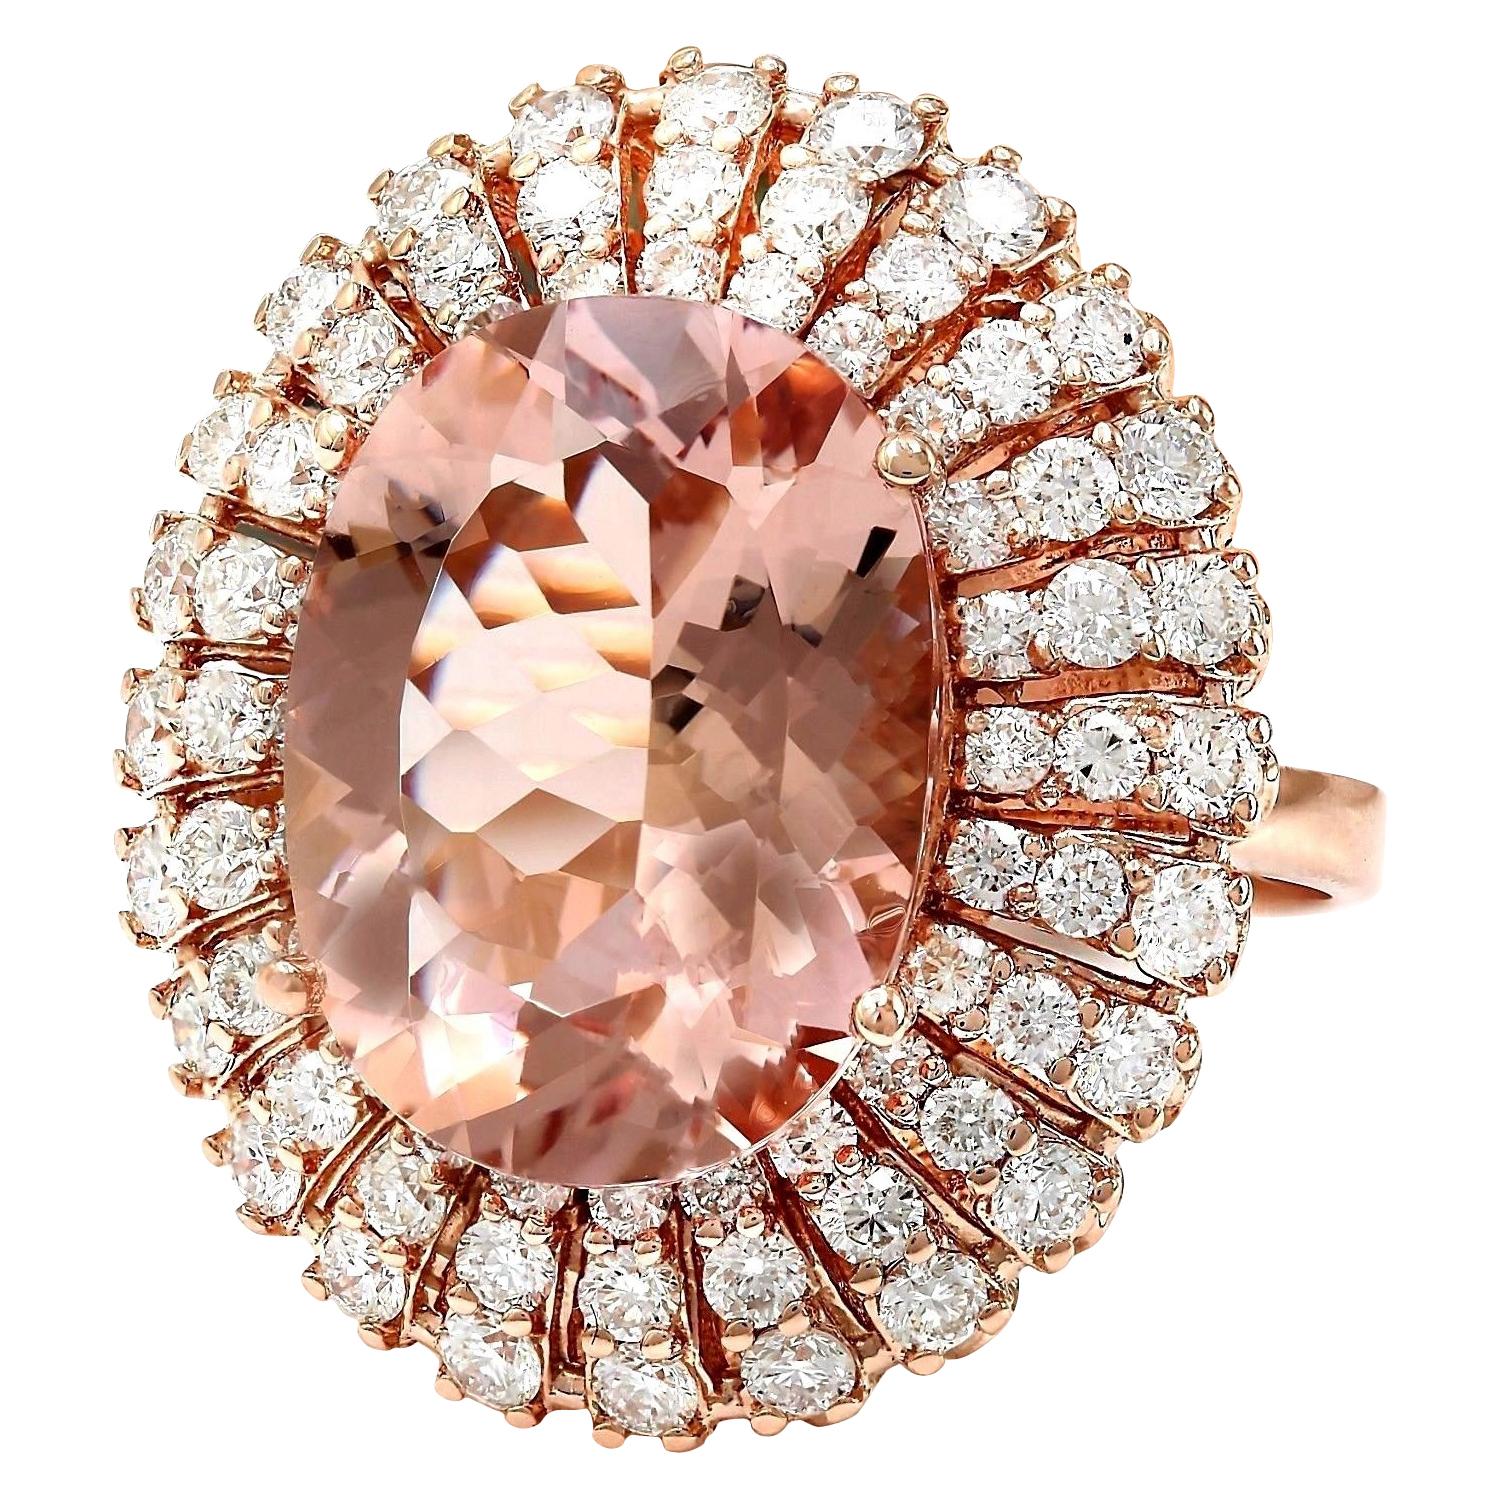 12.05 Carat  Morganite 14K Solid Rose Gold Diamond Ring
Item Type: Ring
Item Style: Cocktail
Material: 14K Rose Gold
Mainstone: Morganite
Stone Color: Peach
Stone Weight: 9.90 Carat
Stone Shape: Oval
Stone Quantity: 1
Stone Dimensions: 16.00x12.00